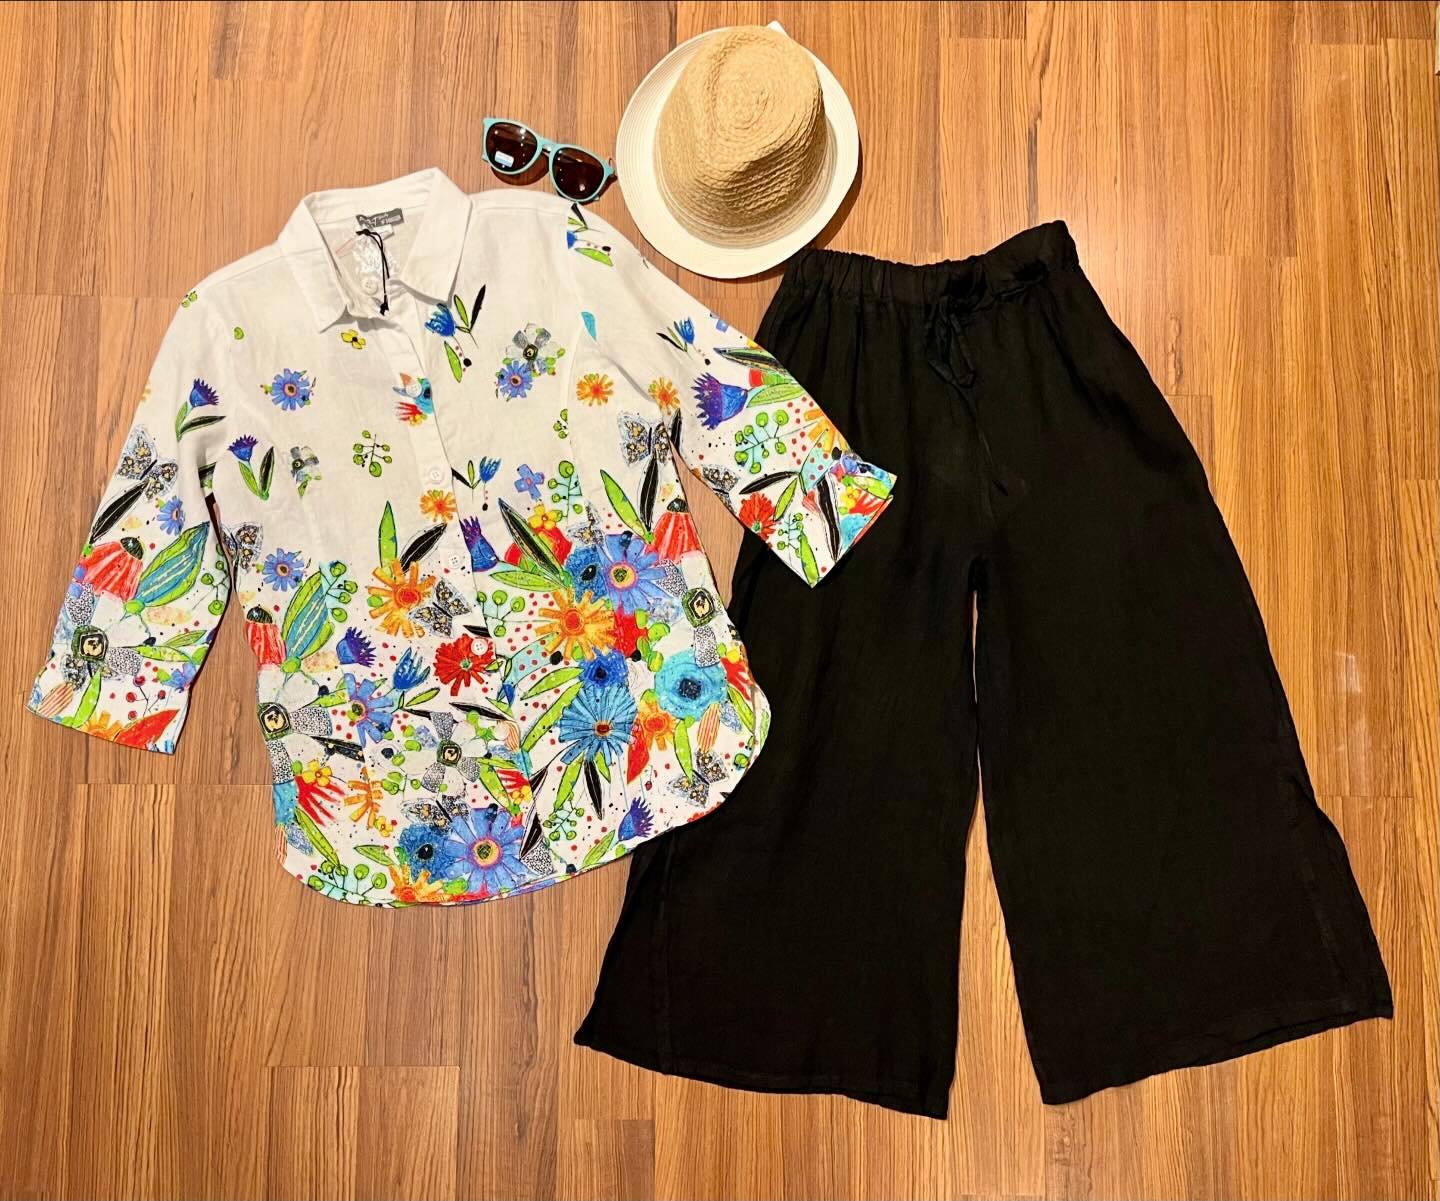 Bringing on May flowers with this outfit! #newarrivals #outfitinspiration #mayflowers #springclothes #shoplocal #theresnoplacelikehome #downtowndurango #durango #colorado